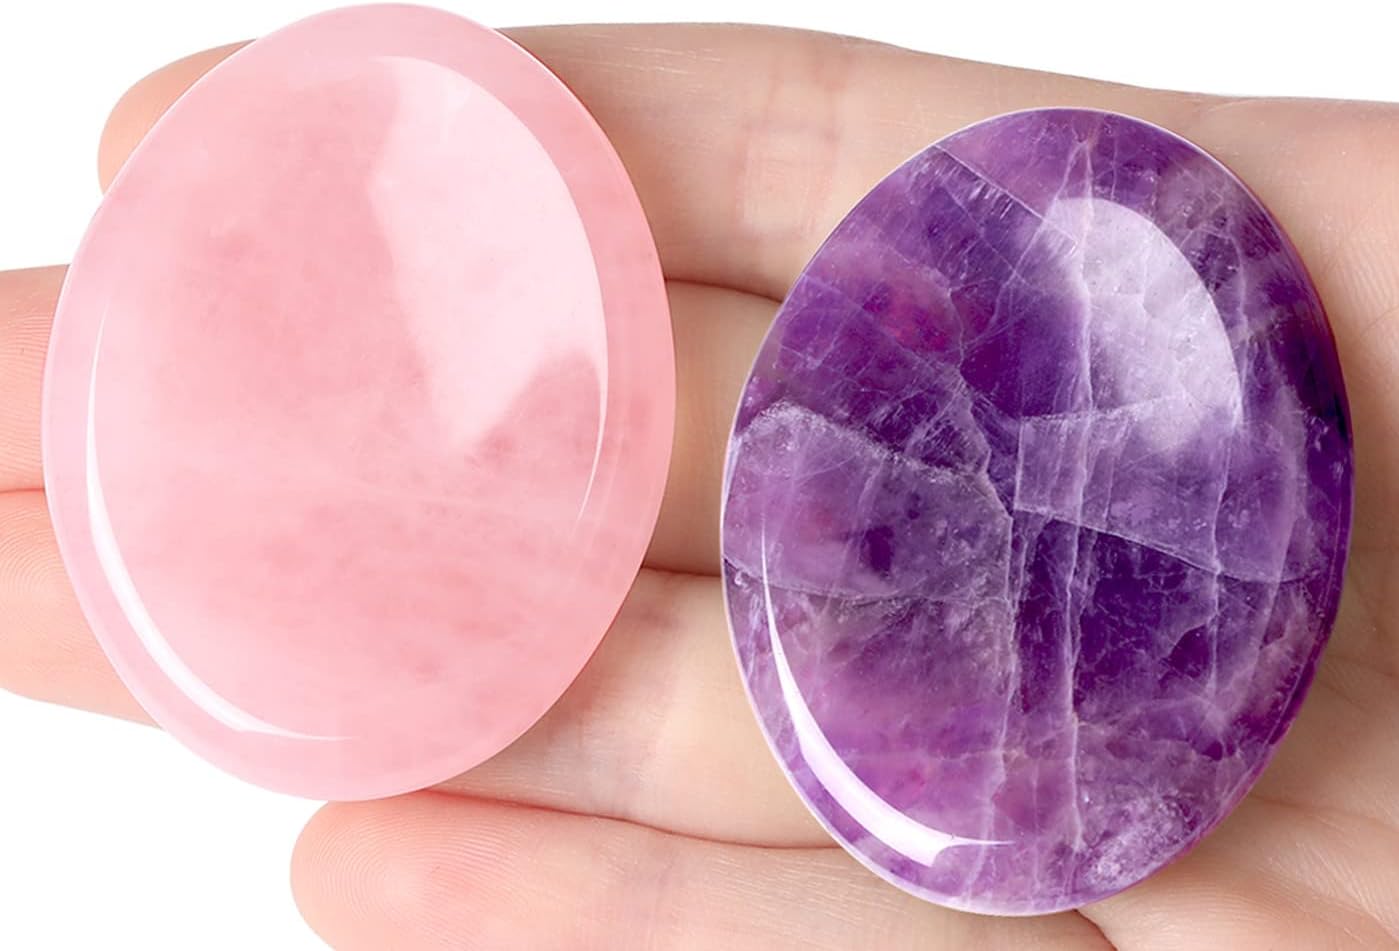 2PCS Worry Stone for Anxiety Tiger's Eye Amethyst Healing Crystals Hand Carved Thumb Stones Pocket Gemstones Meditation Oval Shaped Crystal Natural Reiki Relax Palm Stone Therapy Relief Sets